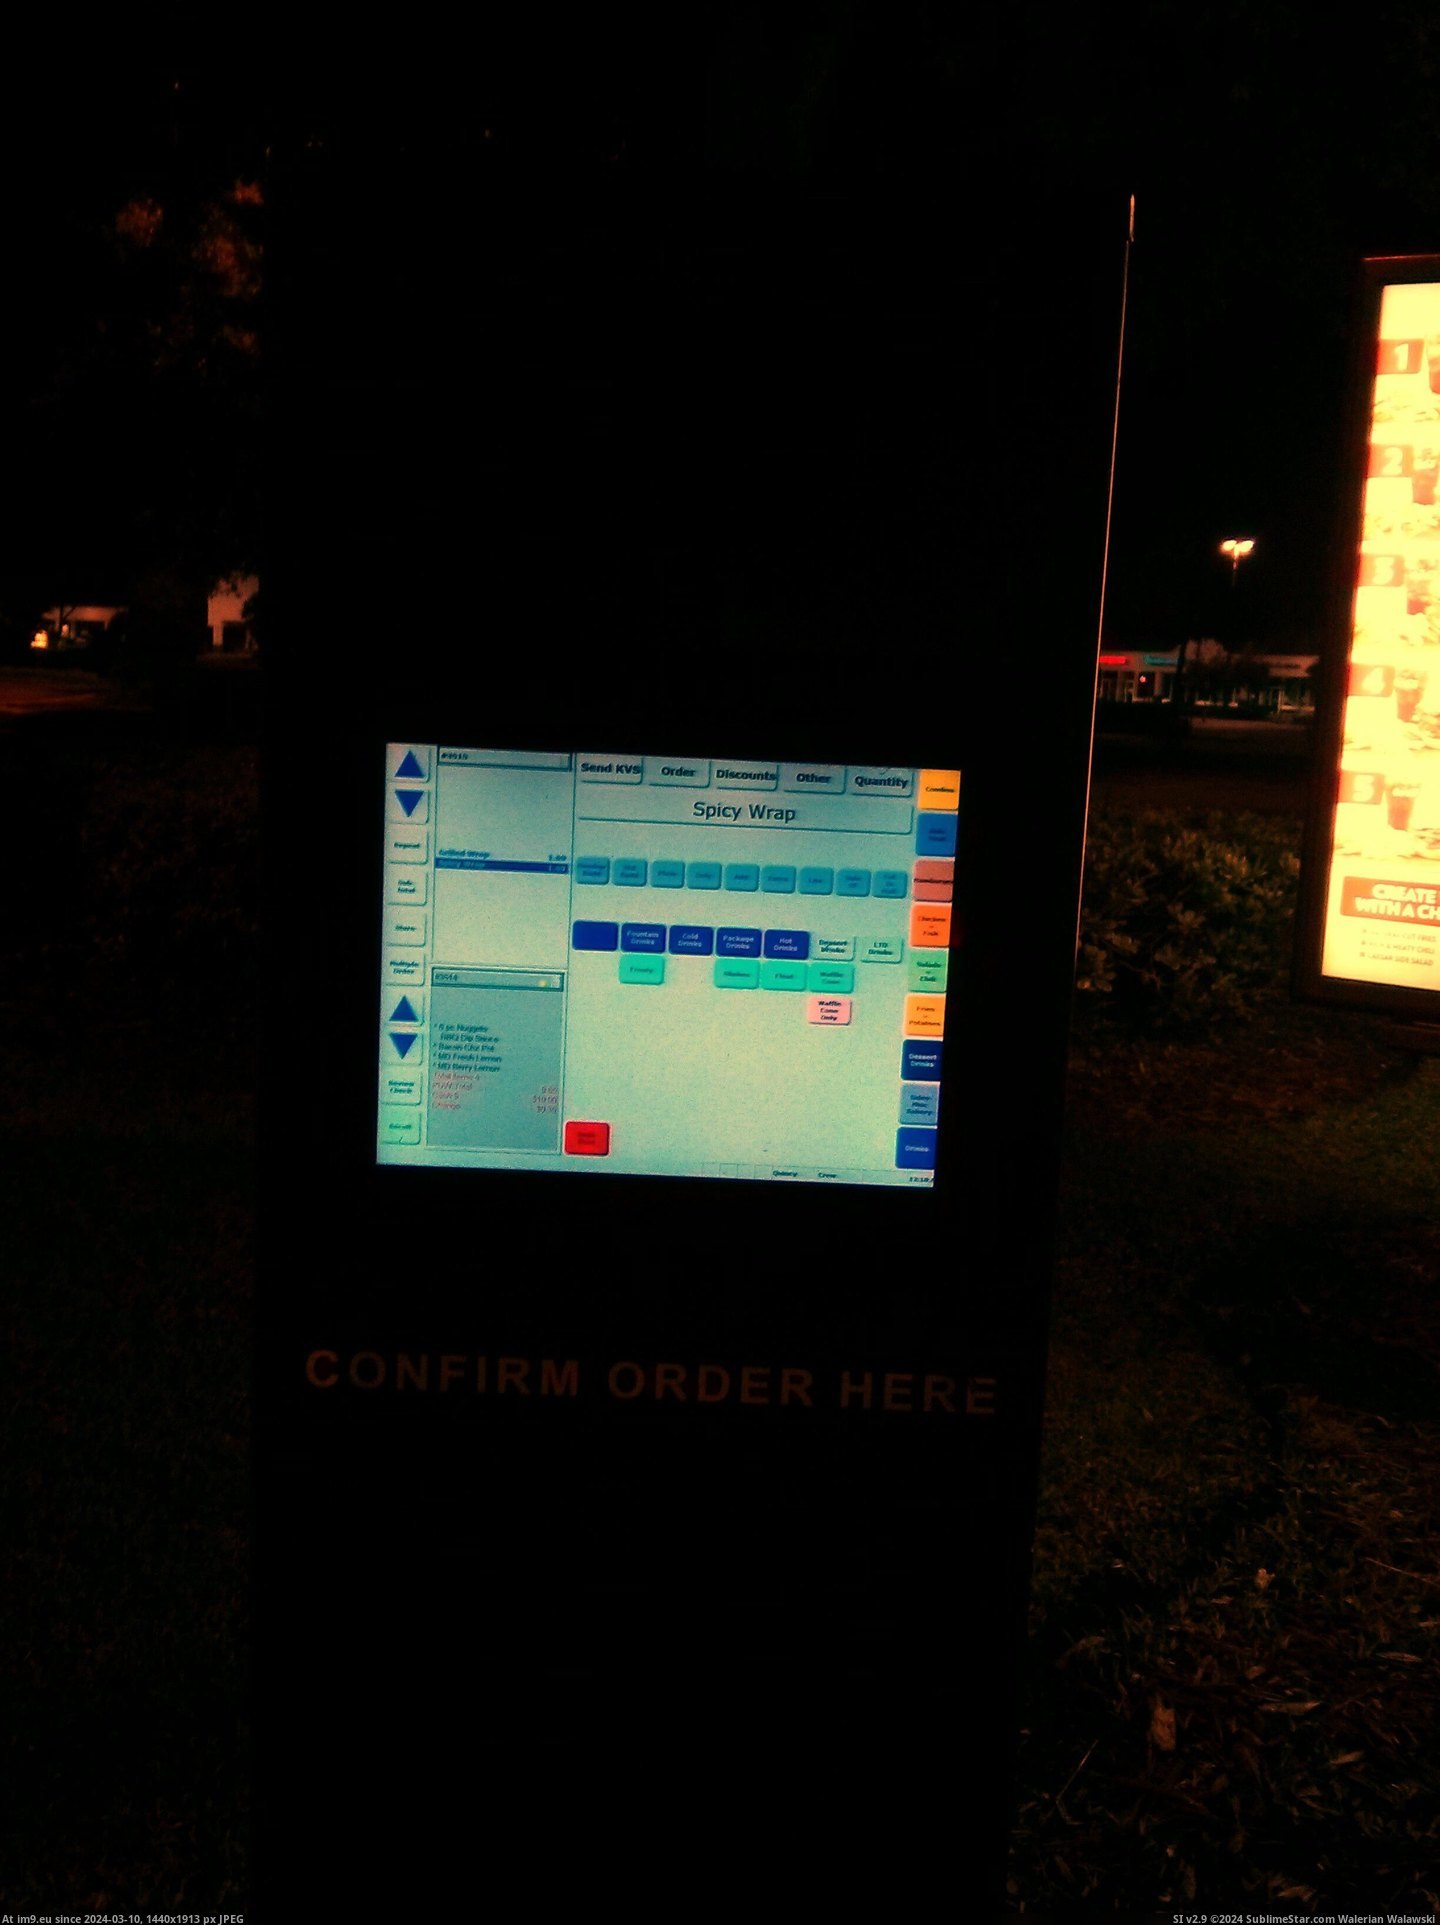 #Night #Screen #Order #Confirmation #Custome #Drive #Showed #Cashier [Mildlyinteresting] Last night, the order confirmation screen at the drive-thru showed the cashier's view instead of the custome Pic. (Image of album My r/MILDLYINTERESTING favs))